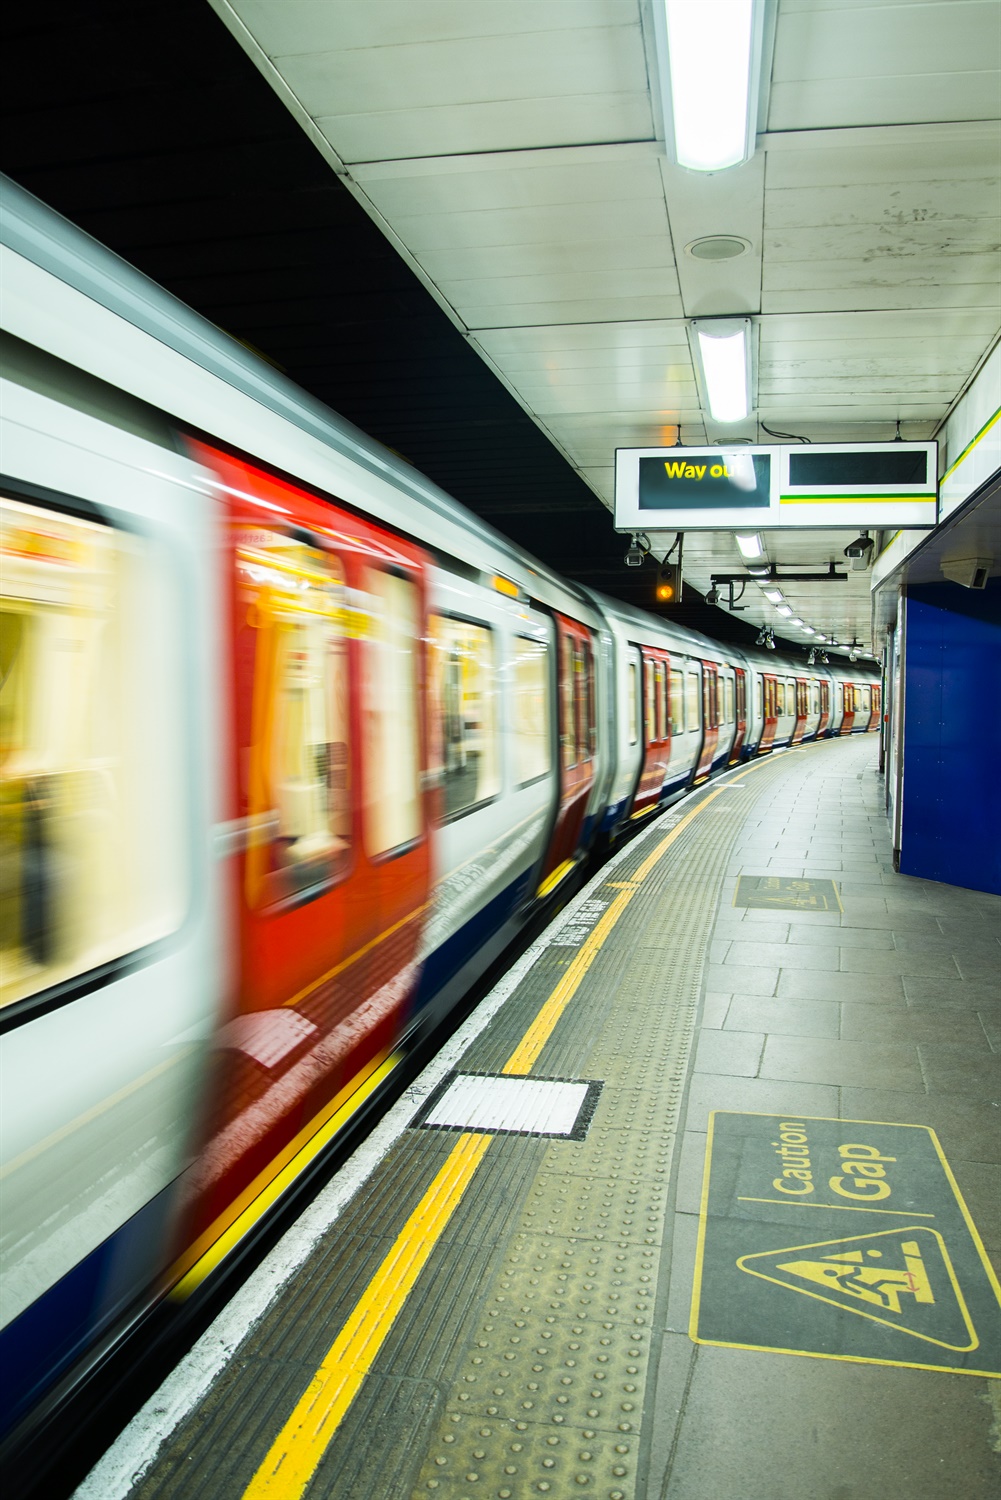 Night Tube could contribute up to £1.5bn to London's economy, report says